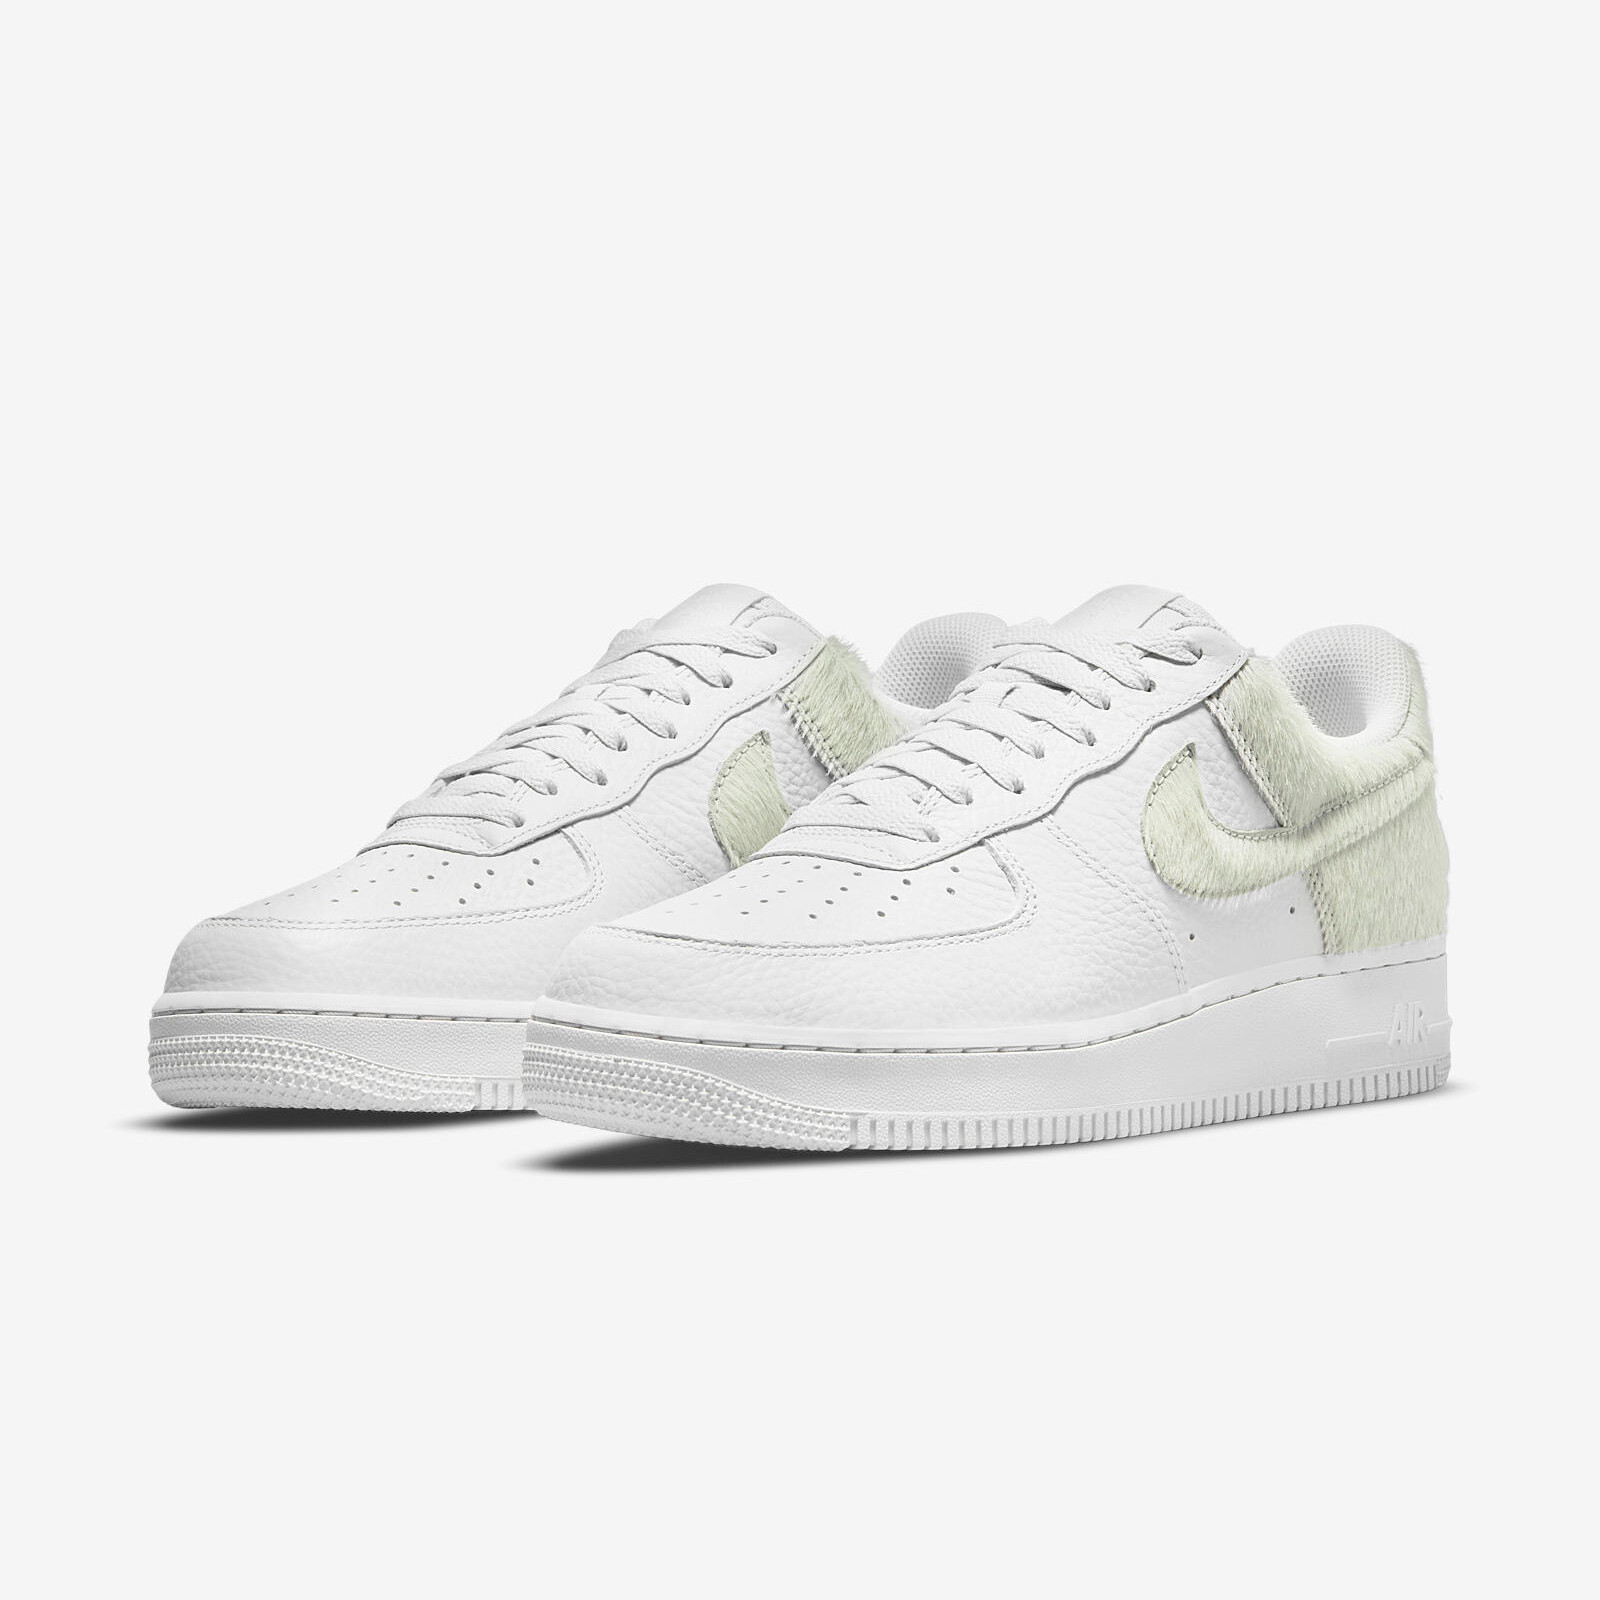 Nike Air Force 1 Low
« Photo Dust »